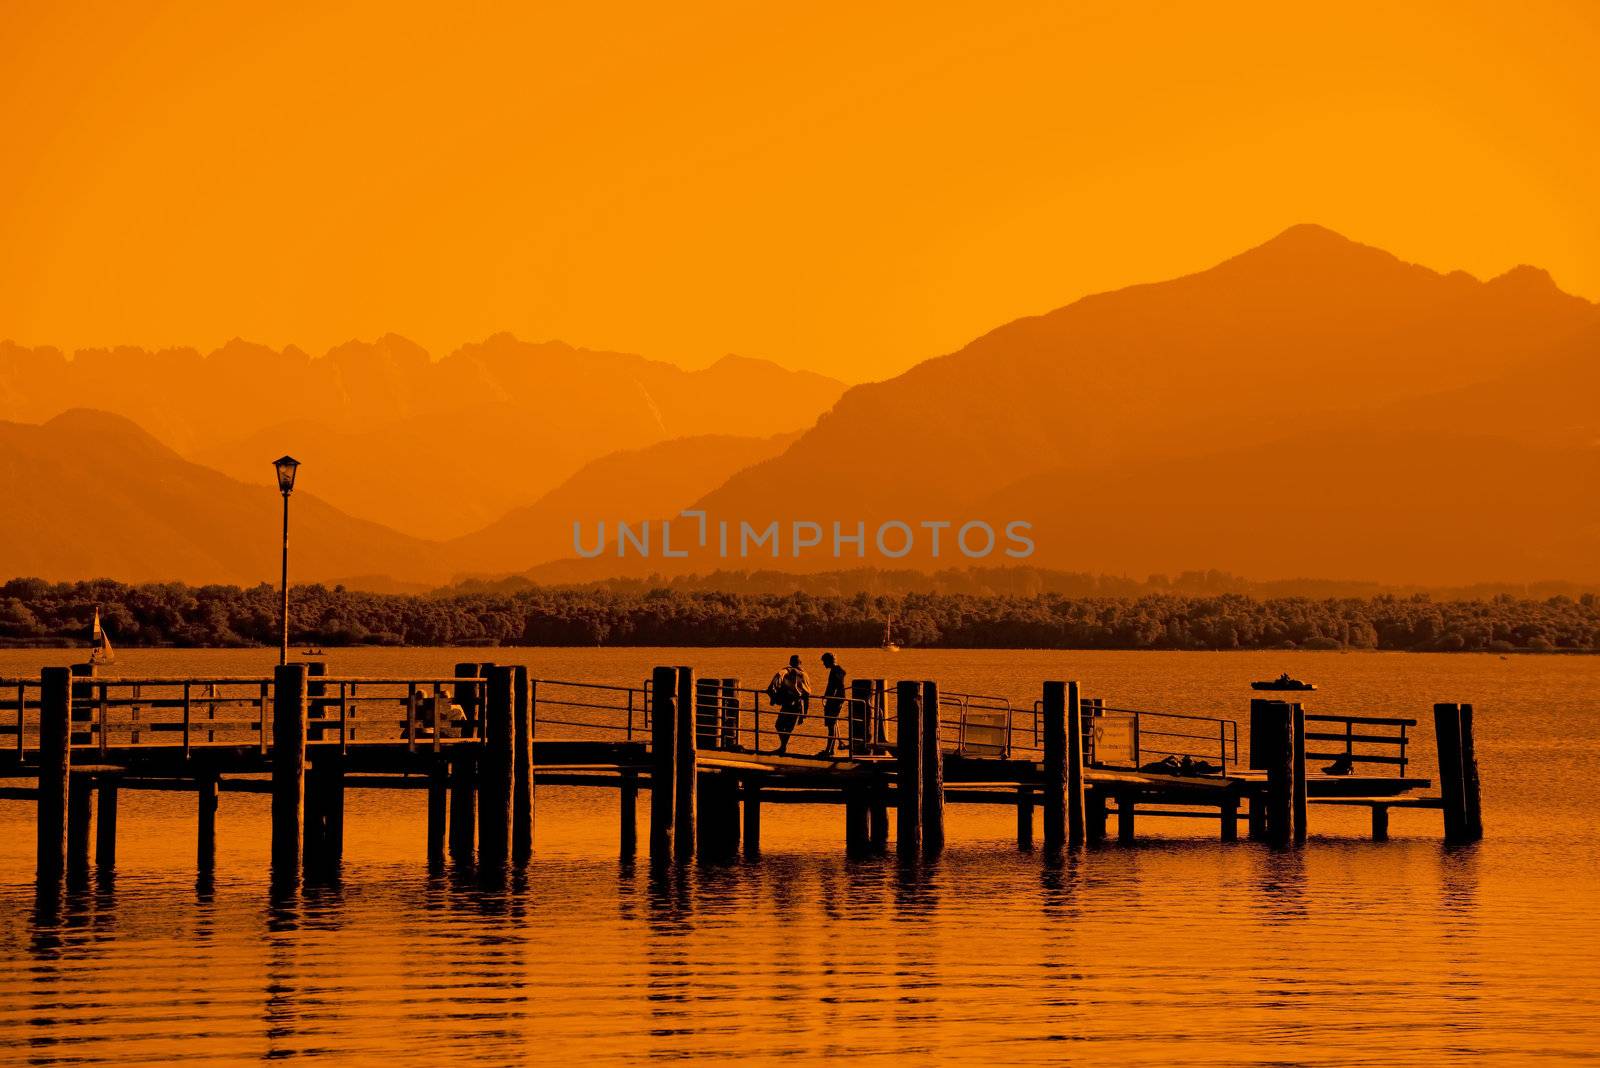 Eveningmood at Chiemsee with red sunlight